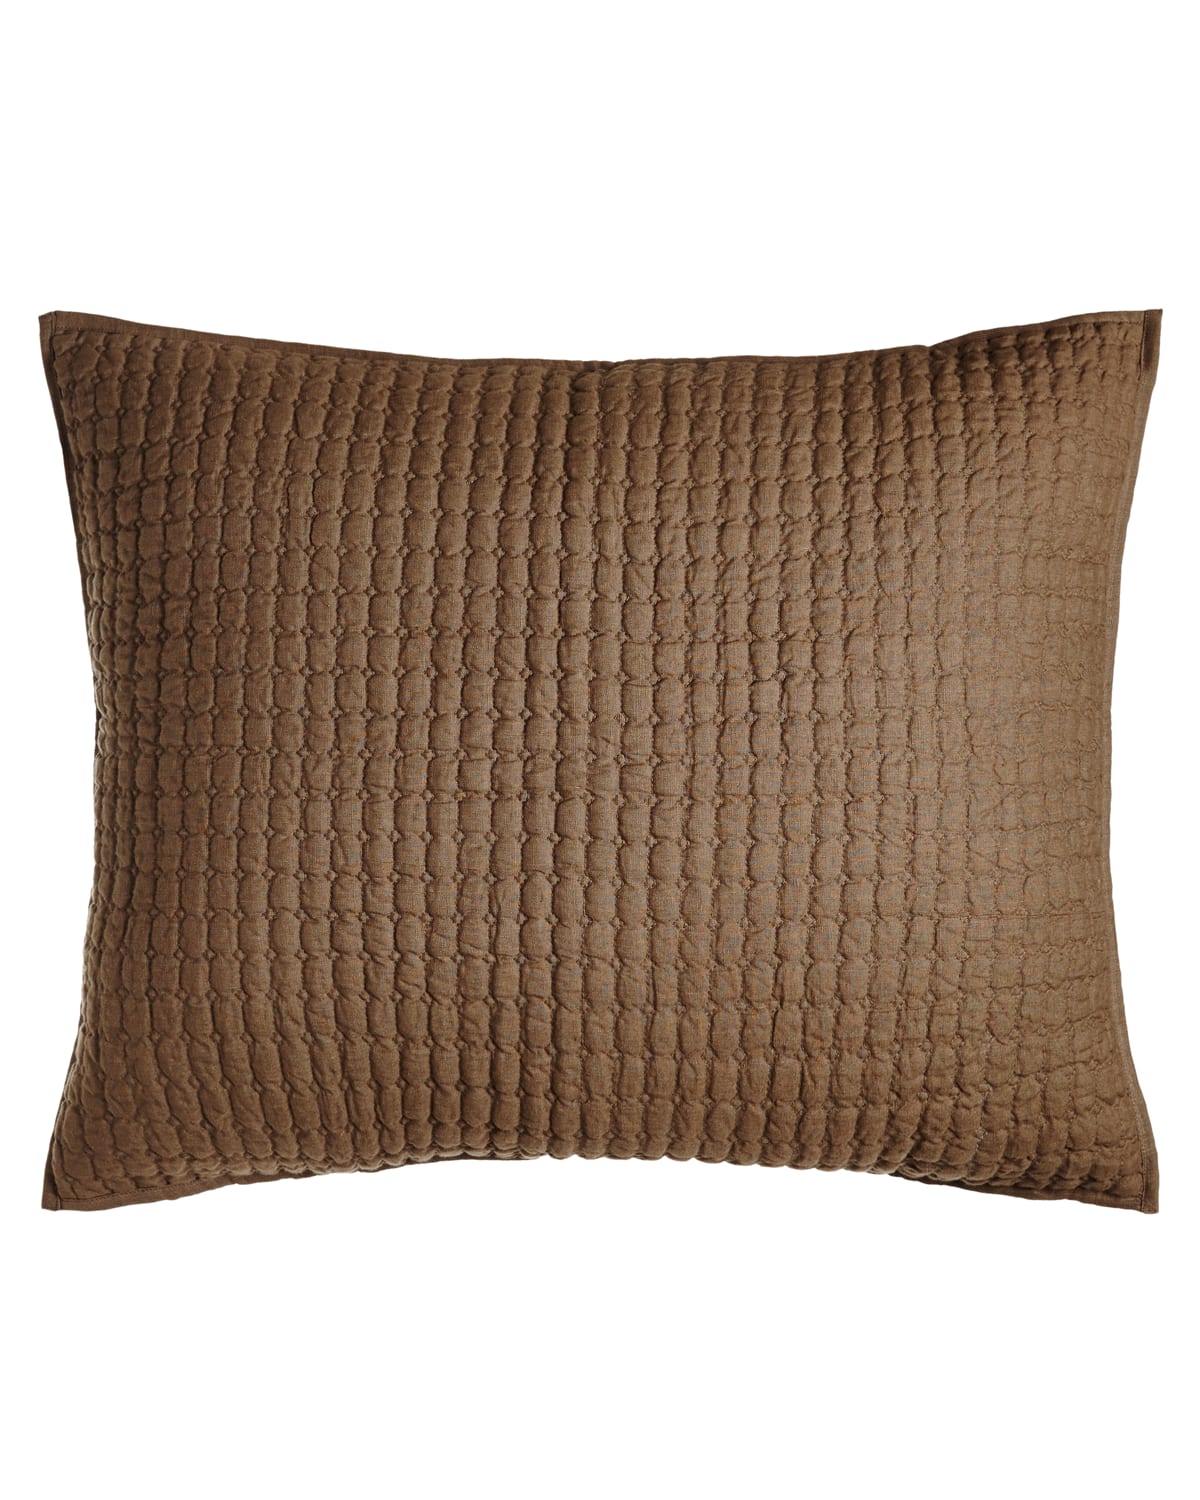 Image Amity Home King Catalina Quilted Linen Sham